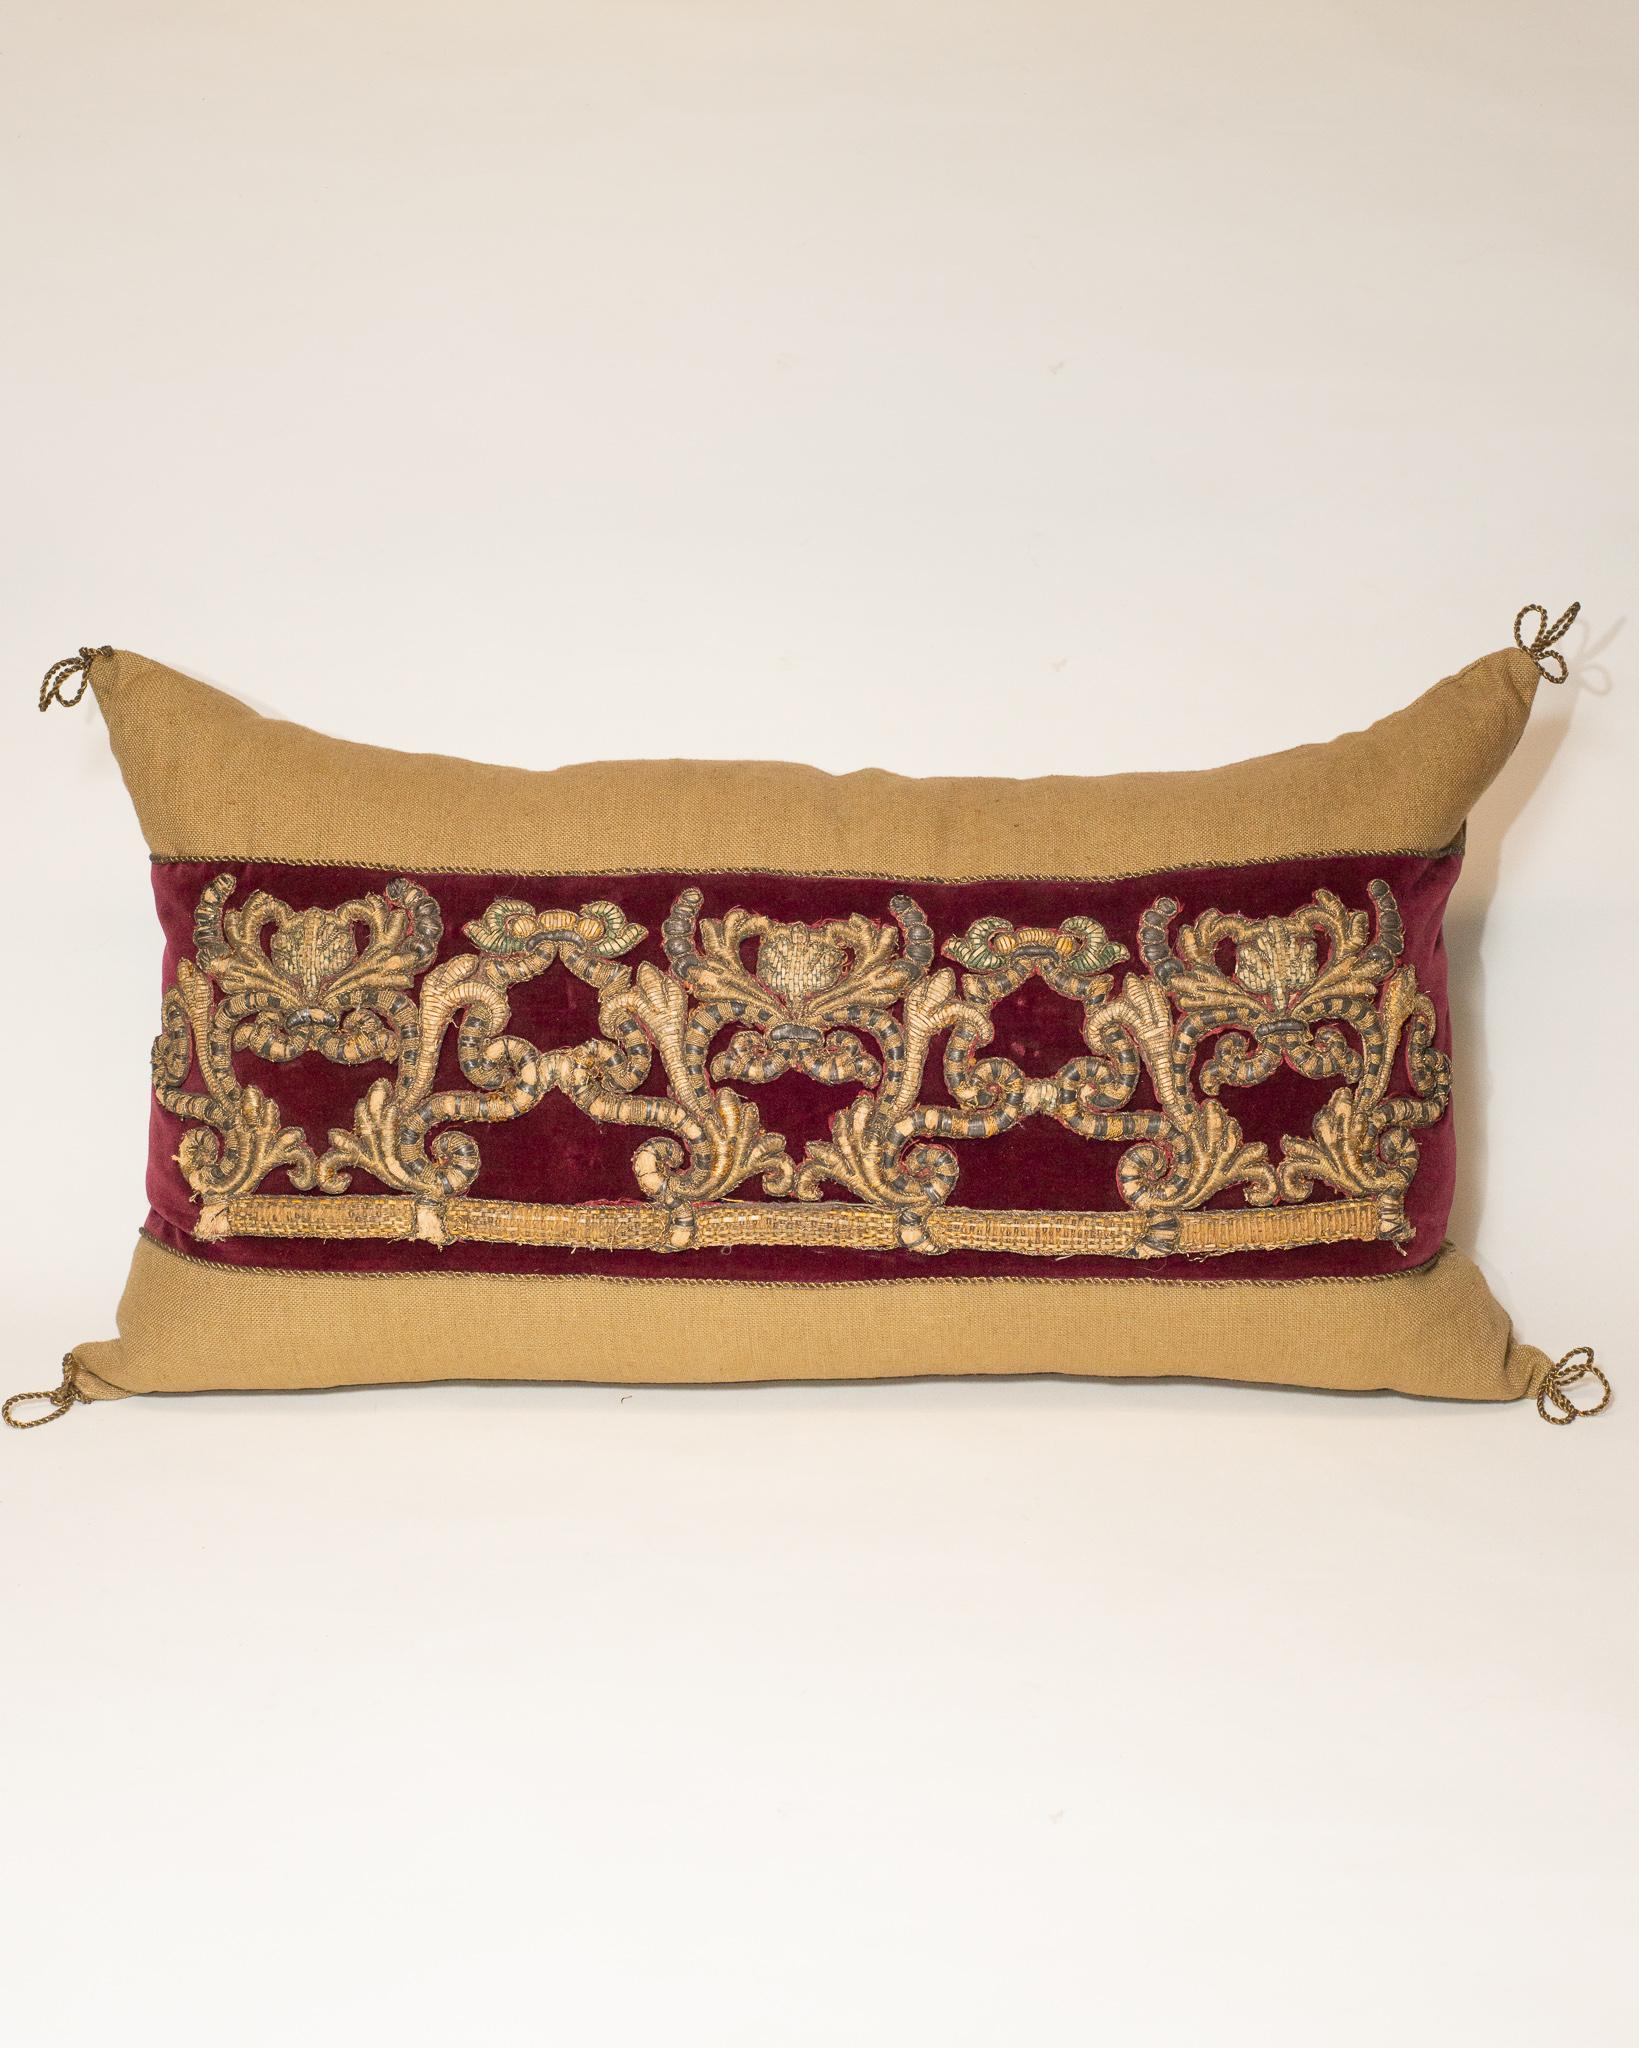 A large beige linen pillow with burgundy velvet and antique metallic embroidery.